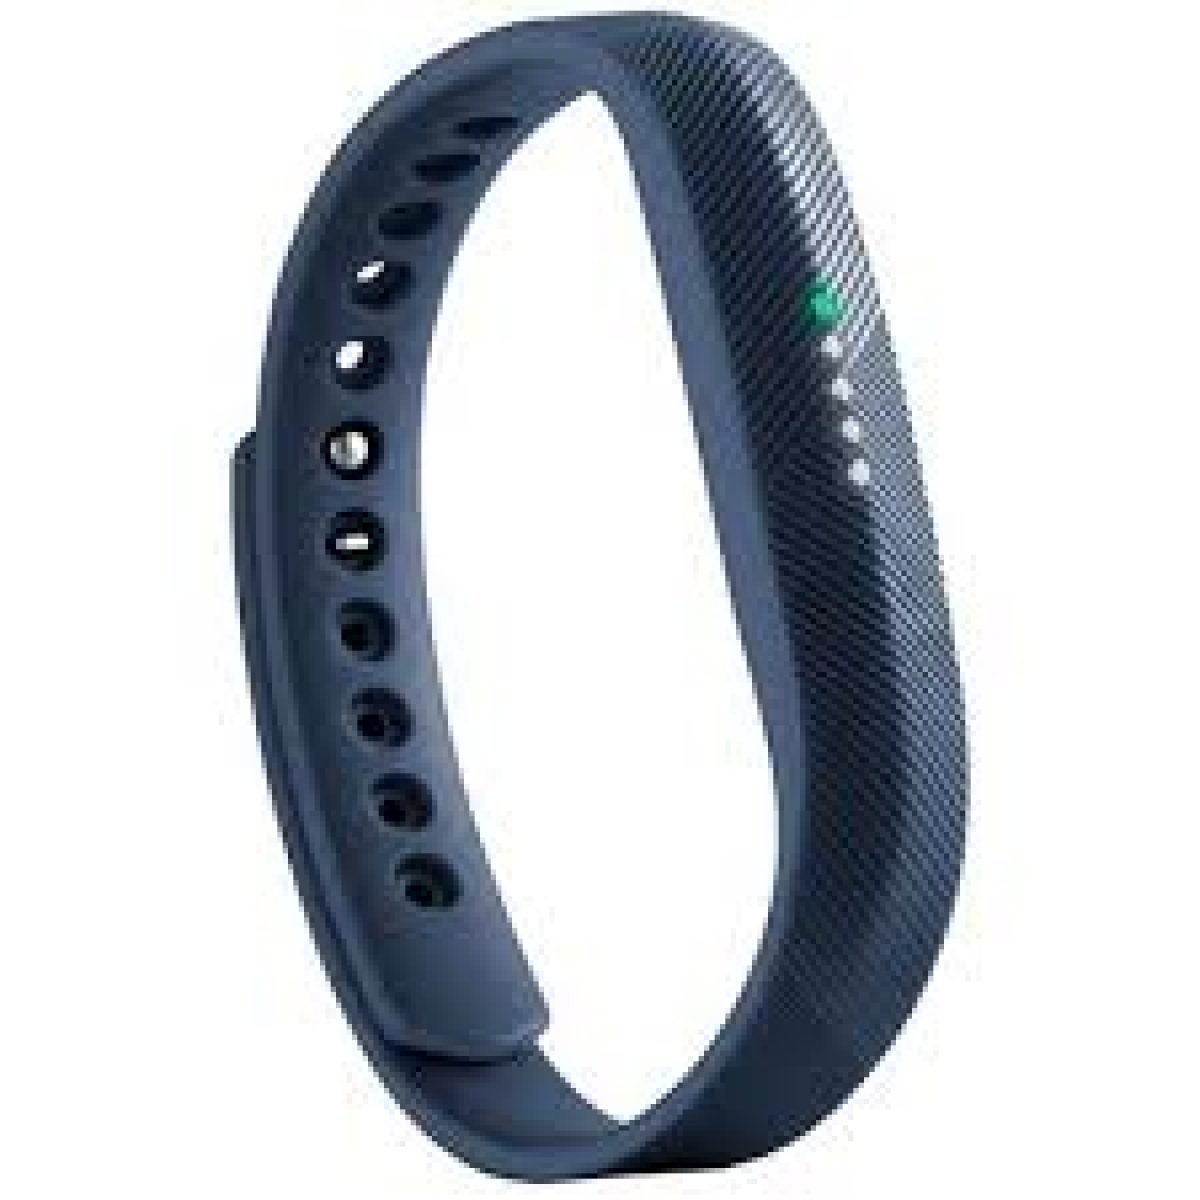 how to reset a flex 2 fitbit